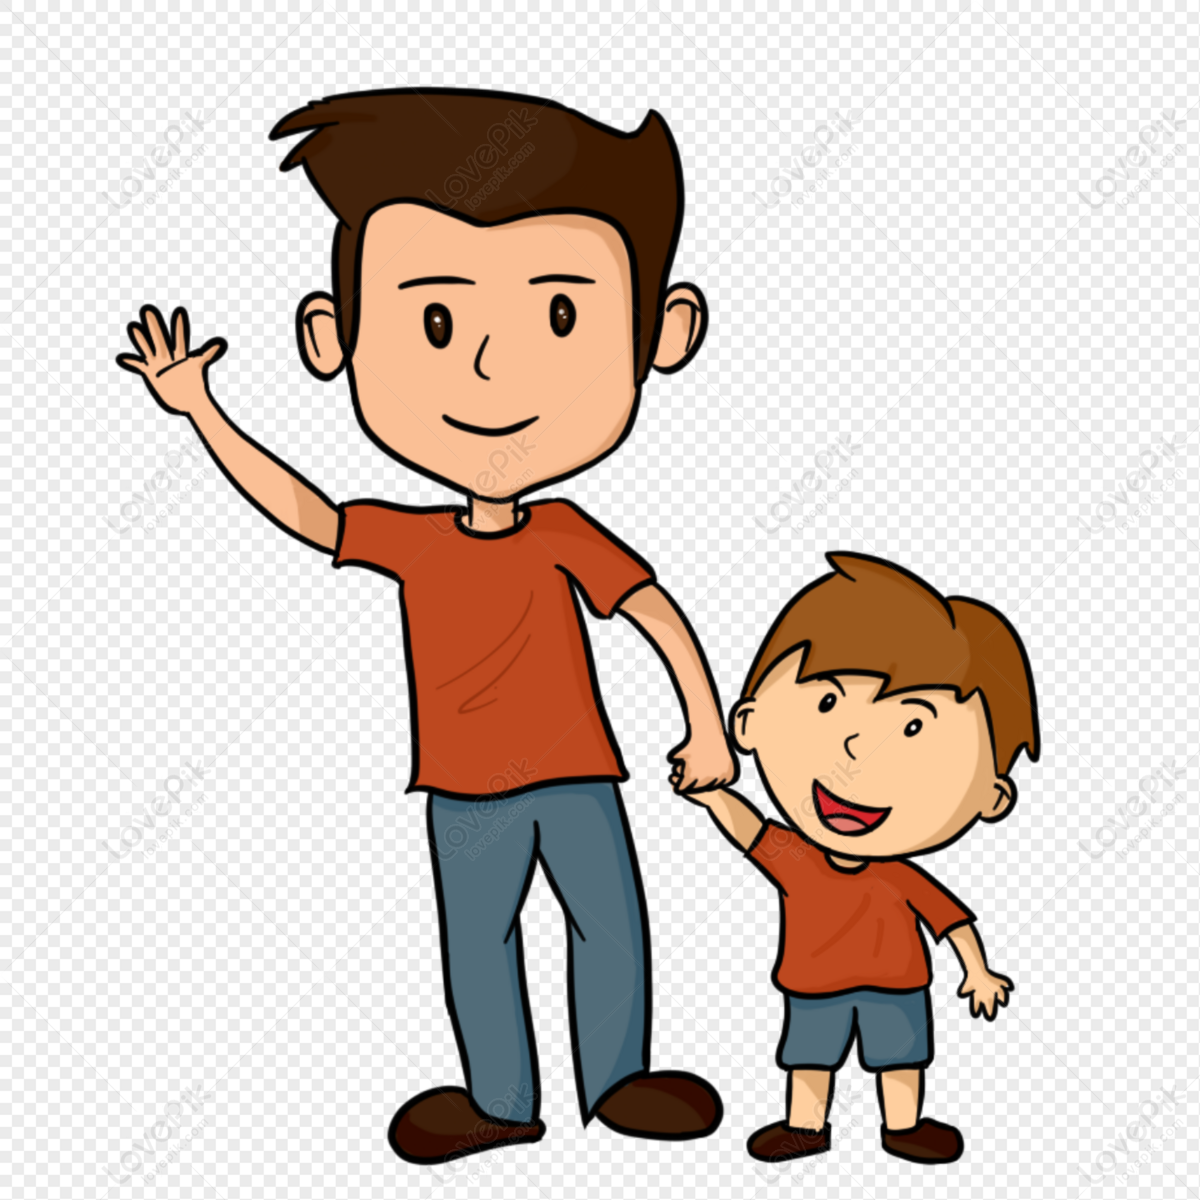 Father And Son PNG Transparent And Clipart Image For Free Download -  Lovepik | 401378506